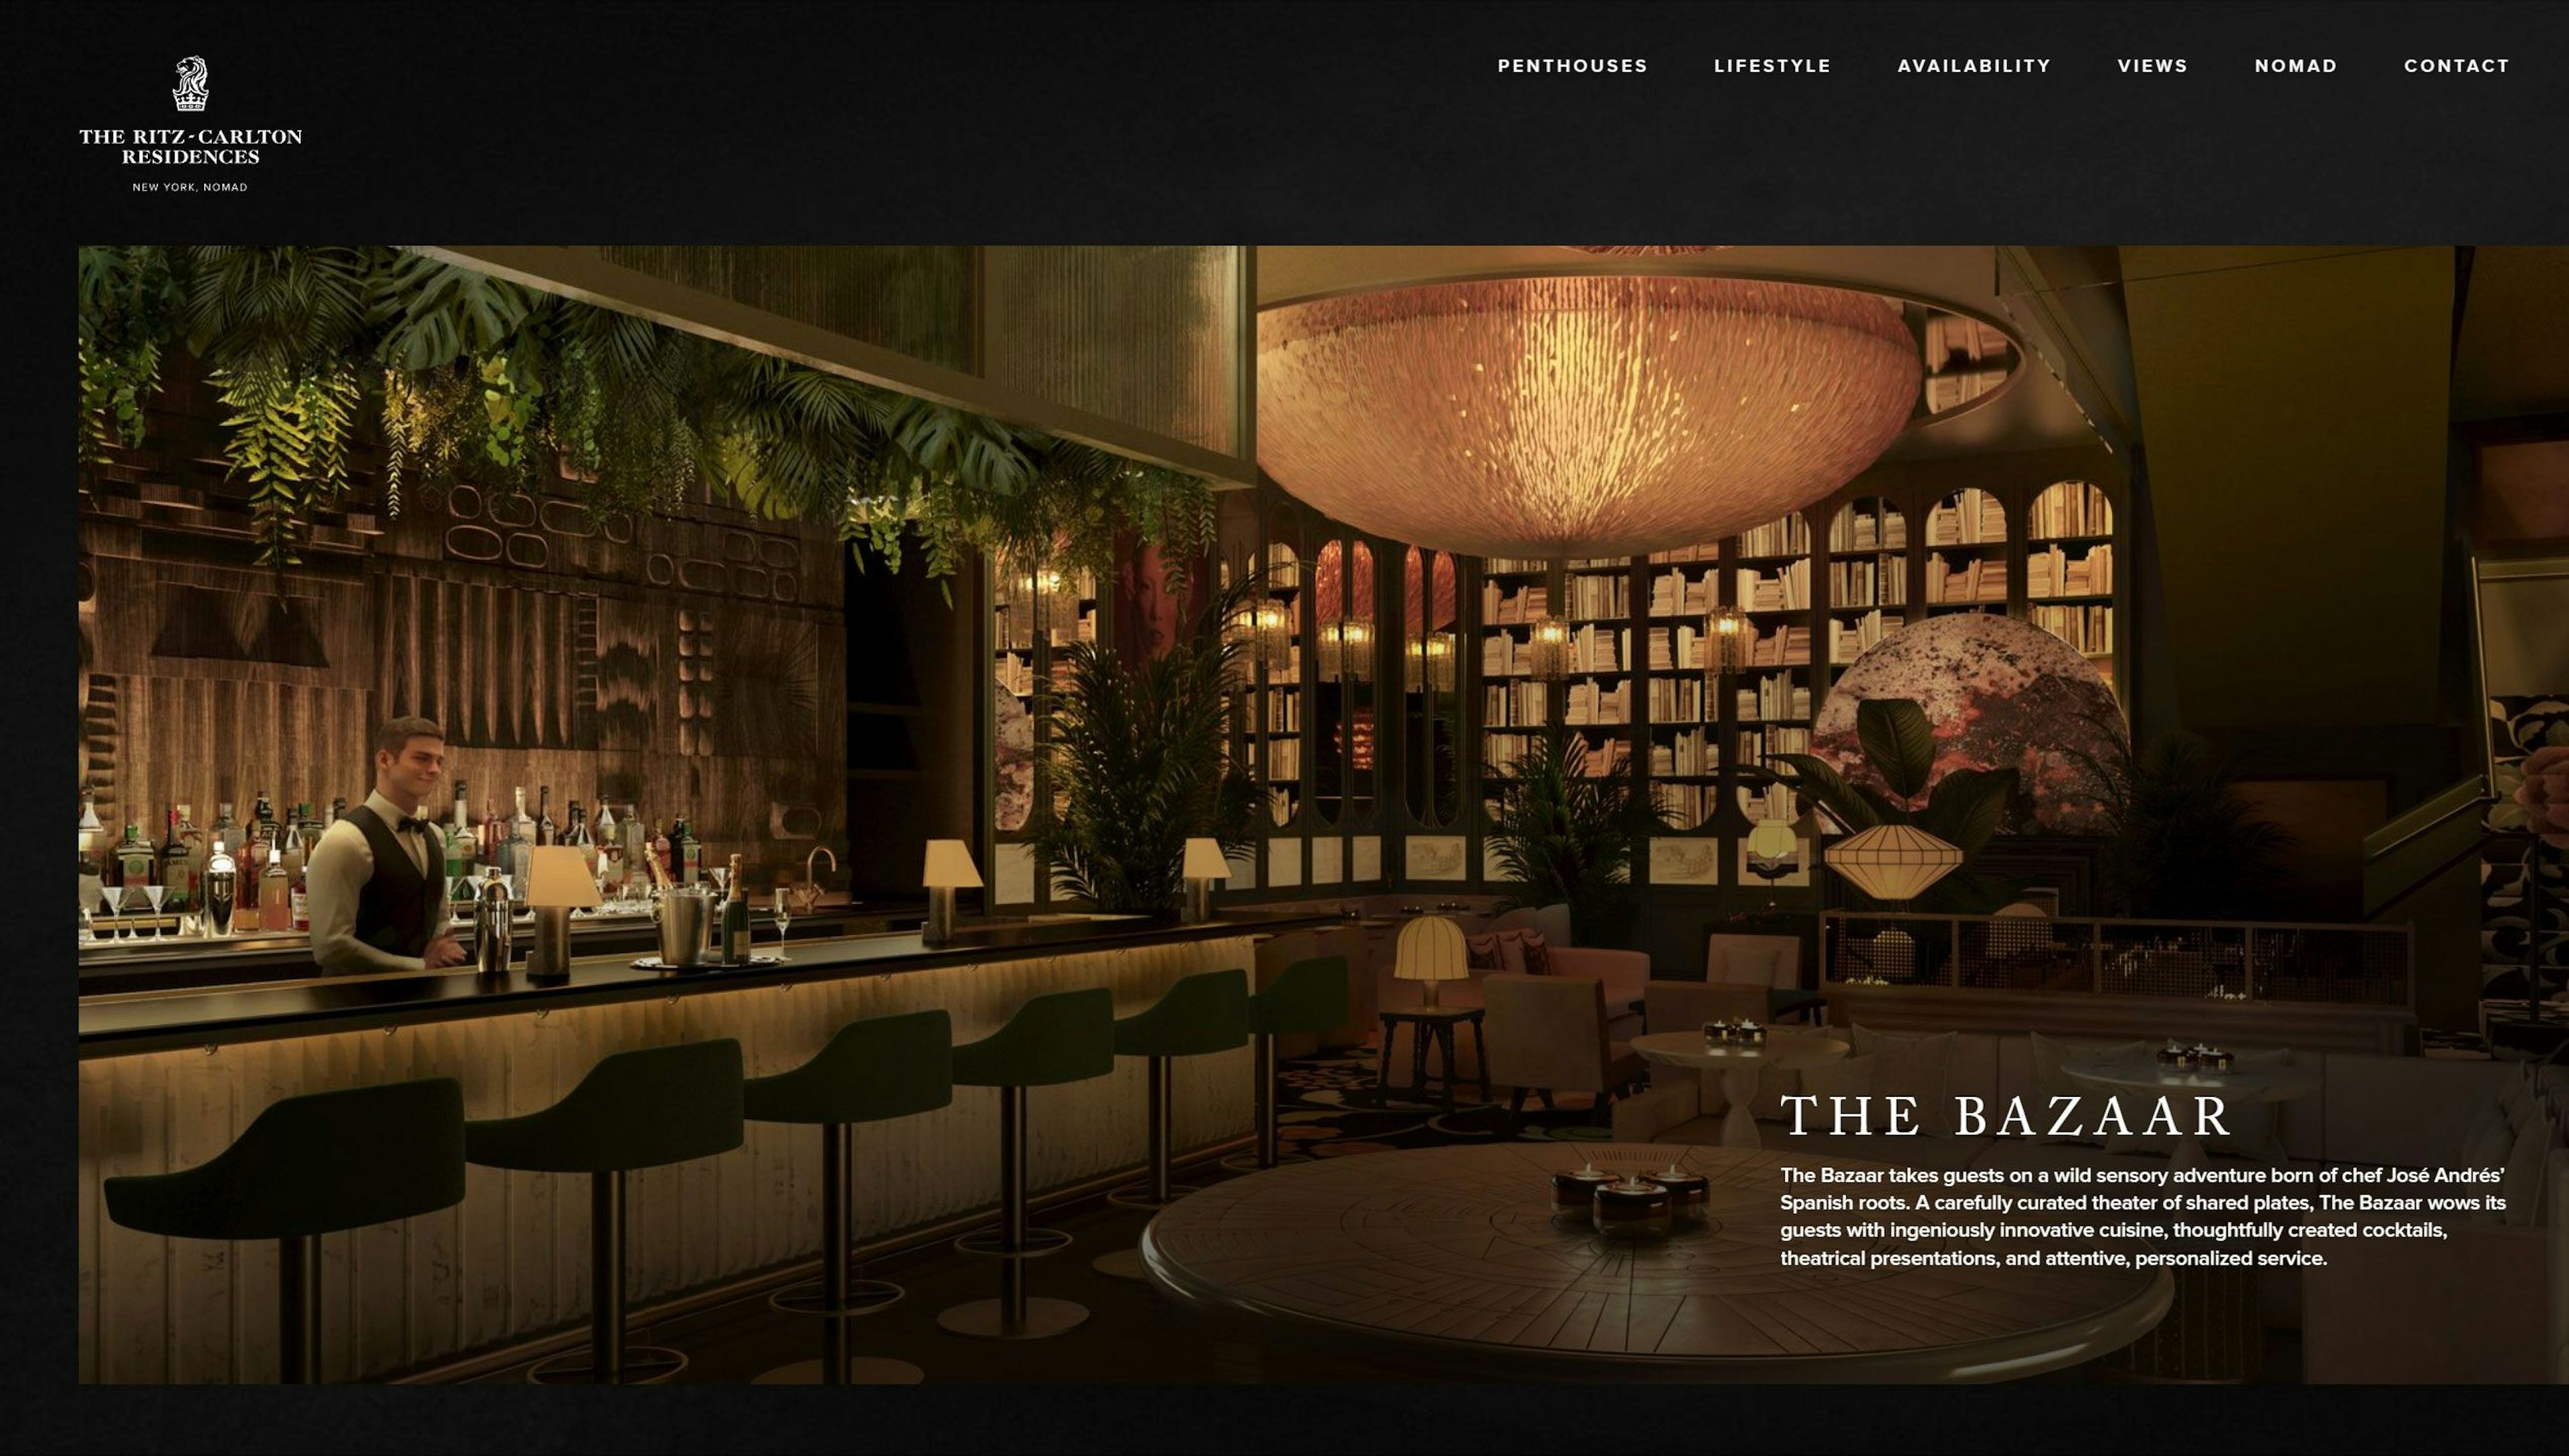 A screenshot of the site with the image of The Bazaar restaurant